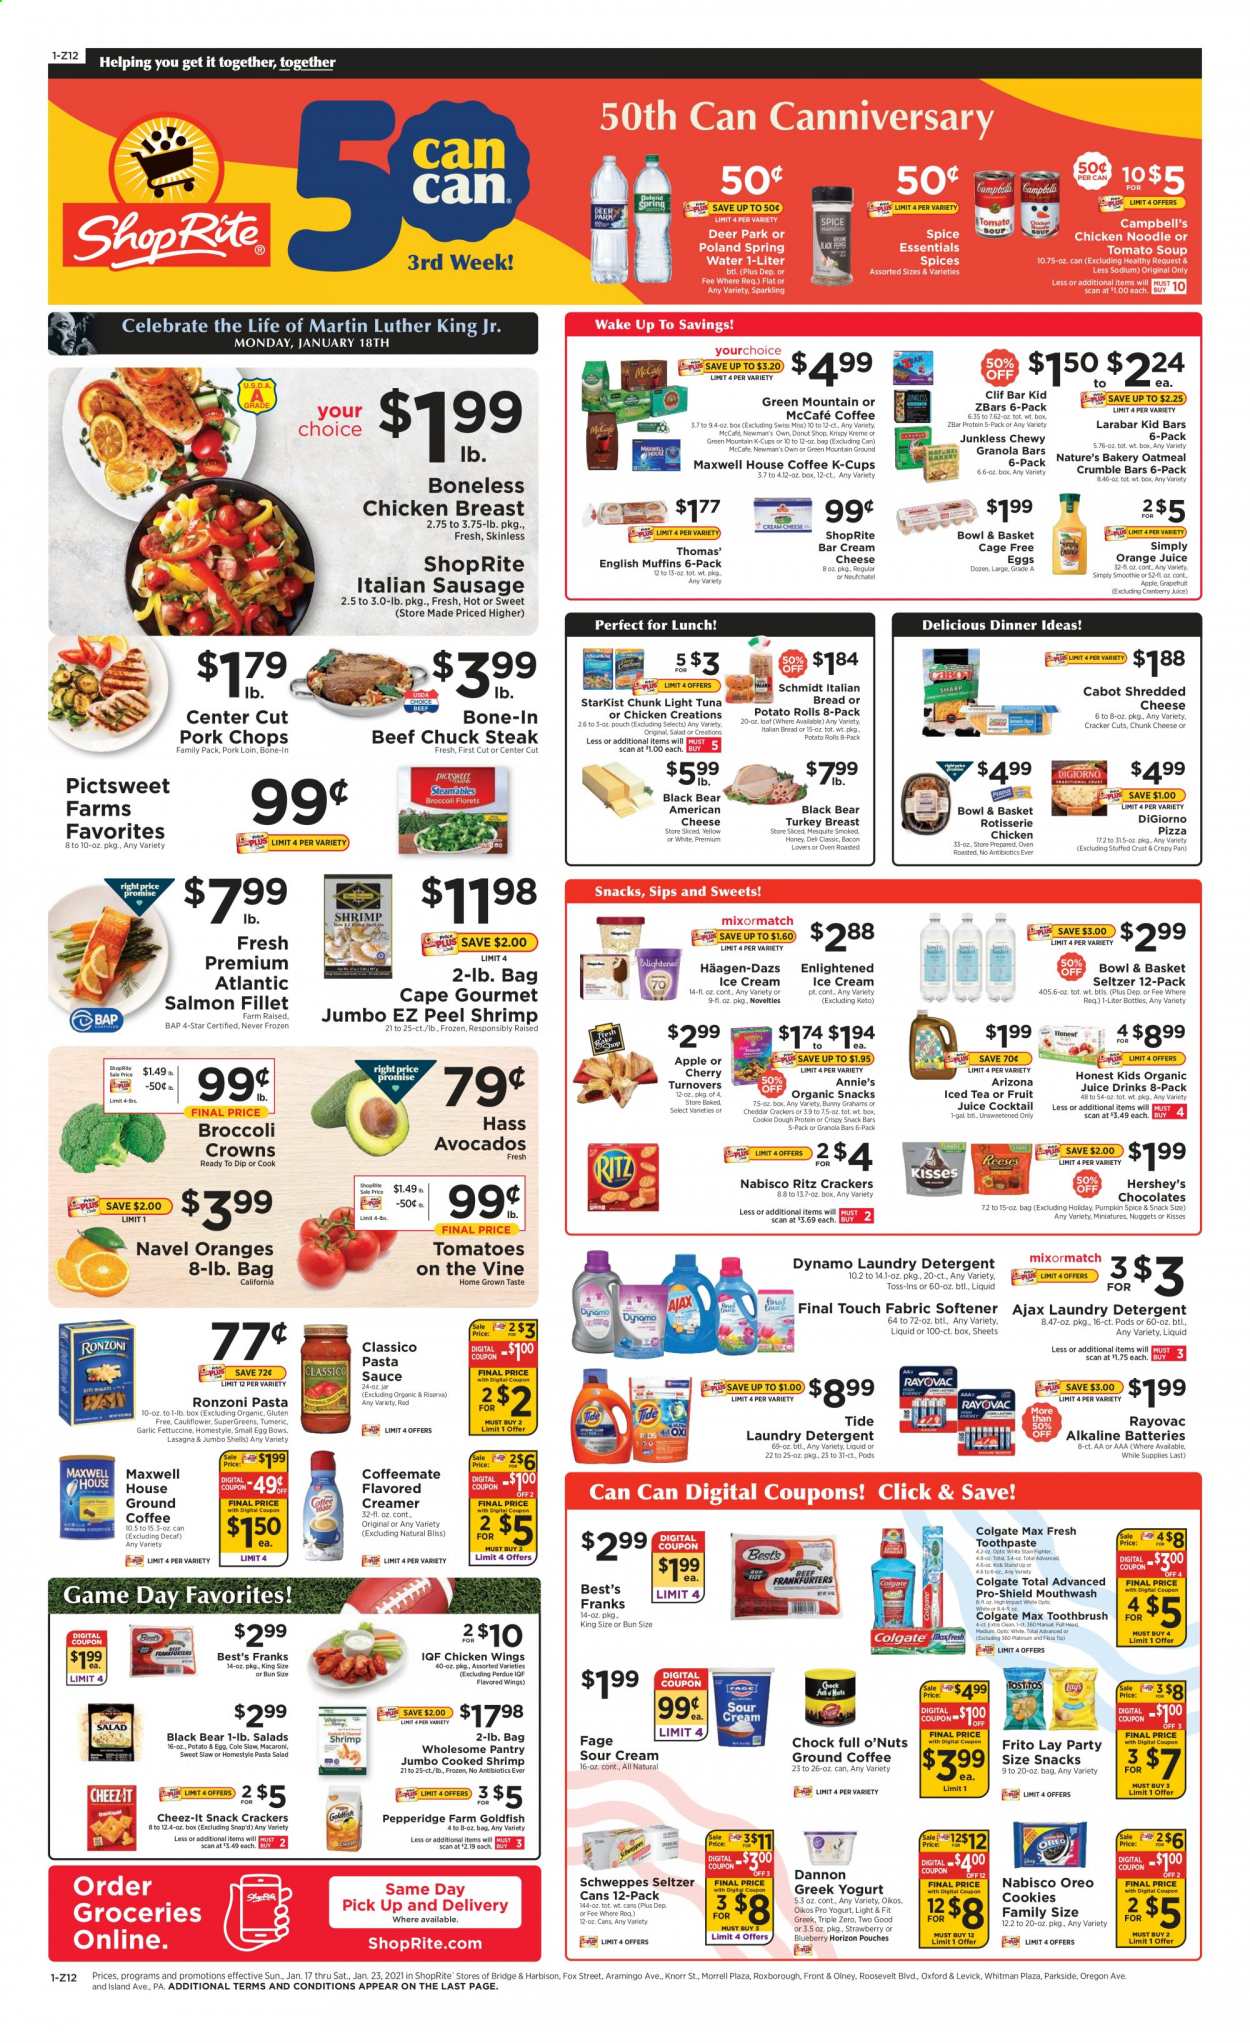 thumbnail - ShopRite Flyer - 01/17/2021 - 01/23/2021 - Sales products - bread, potato rolls, turnovers, salmon, salmon fillet, tuna, shrimps, StarKist, Campbell's, cream cheese, tomato soup, pizza, soup, nuggets, Knorr, salad, sauce, lasagna meal, Perdue®, Annie's, Bowl & Basket, bacon, sausage, italian sausage, pasta salad, american cheese, Neufchâtel, shredded cheese, chunk cheese, greek yoghurt, Oreo, yoghurt, Oikos, Dannon, eggs, cage free eggs, sour cream, creamer, dip, ice cream, Hershey's, Häagen-Dazs, Enlightened lce Cream, chicken wings, cookies, graham crackers, chocolate, crackers, snack bar, Swiss Miss, RITZ, snack, Cheez-It, oatmeal, garlic, light tuna, granola bar, macaroni, noodles, pasta sauce, honey, cranberry juice, Schweppes, orange juice, juice, fruit juice, AriZona, smoothie, seltzer water, spring water, Maxwell House, coffee capsules, McCafe, K-Cups, Green Mountain, turkey breast, chicken breasts, beef meat, steak, chuck steak, pork chops, pork loin, pork meat, detergent, Ajax, Tide, fabric softener, laundry detergent, Colgate, toothbrush, toothpaste, mouthwash, pan, bowl, battery, alkaline batteries, beef bone. Page 1.